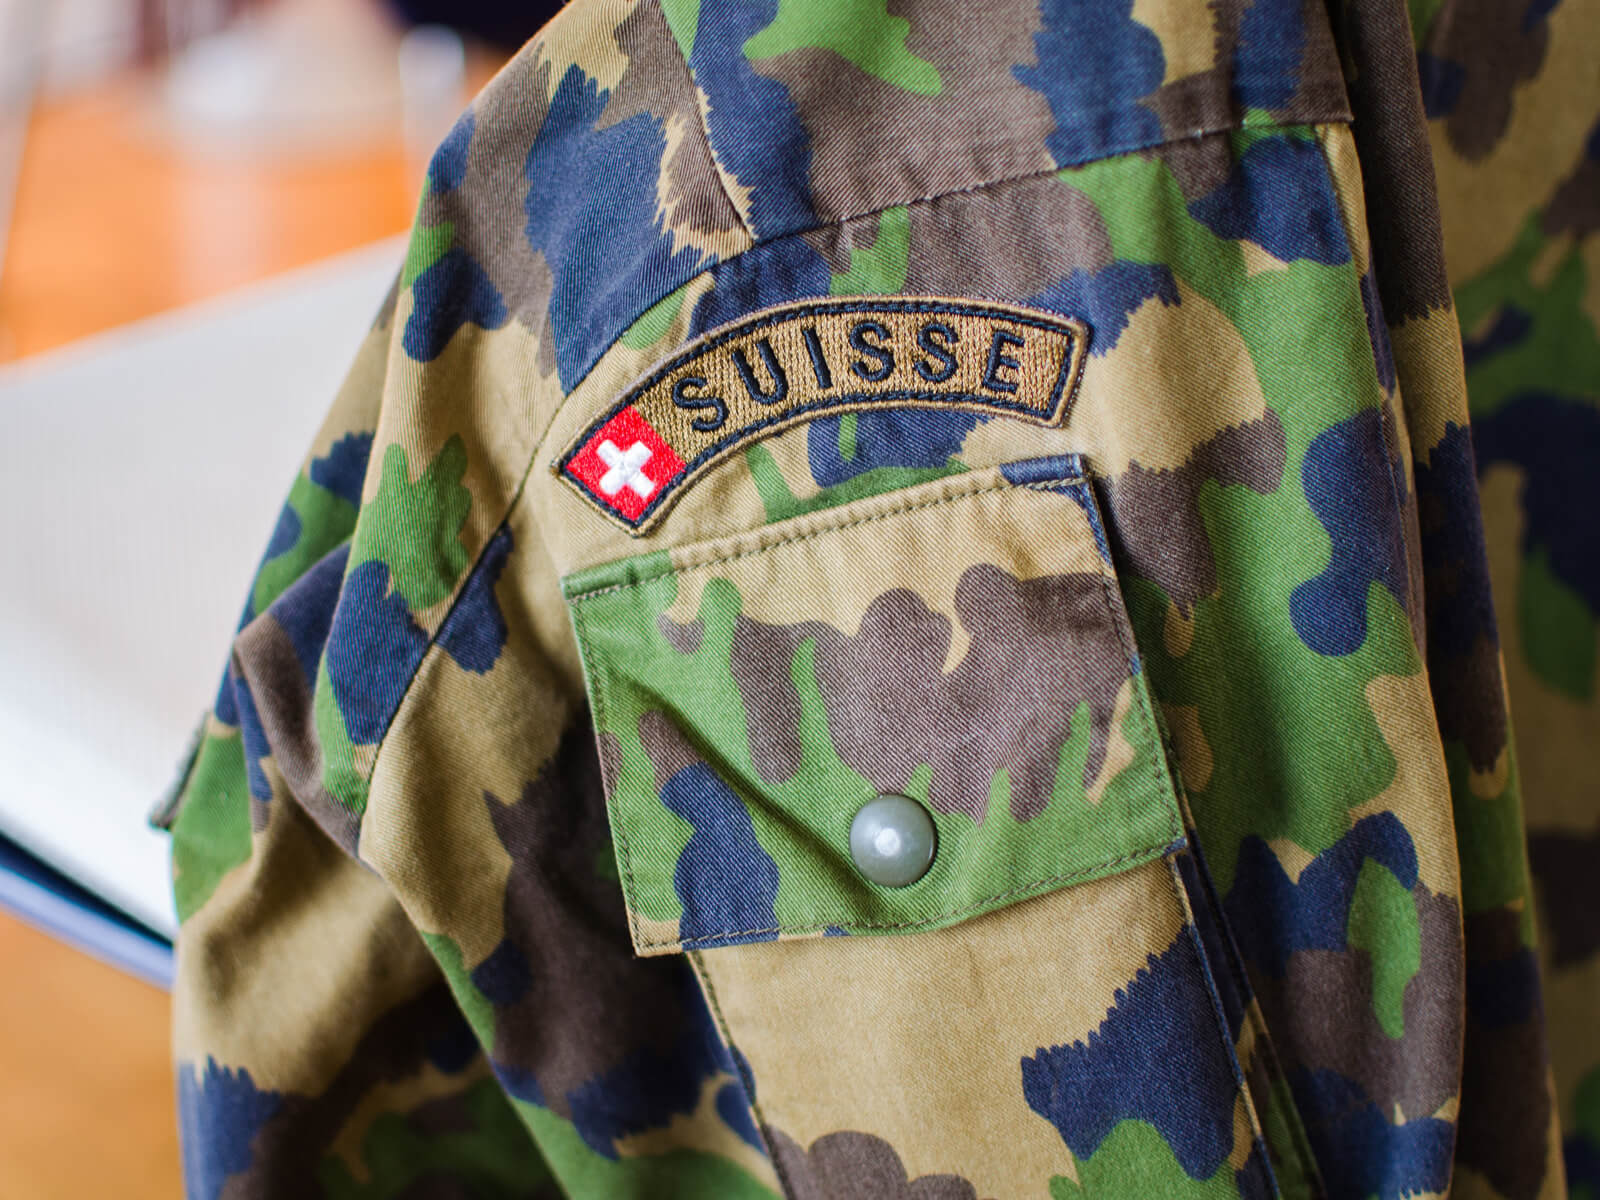 Swiss Army Coat Labeled Suisse - Is Swiss And Switzerland The Same?